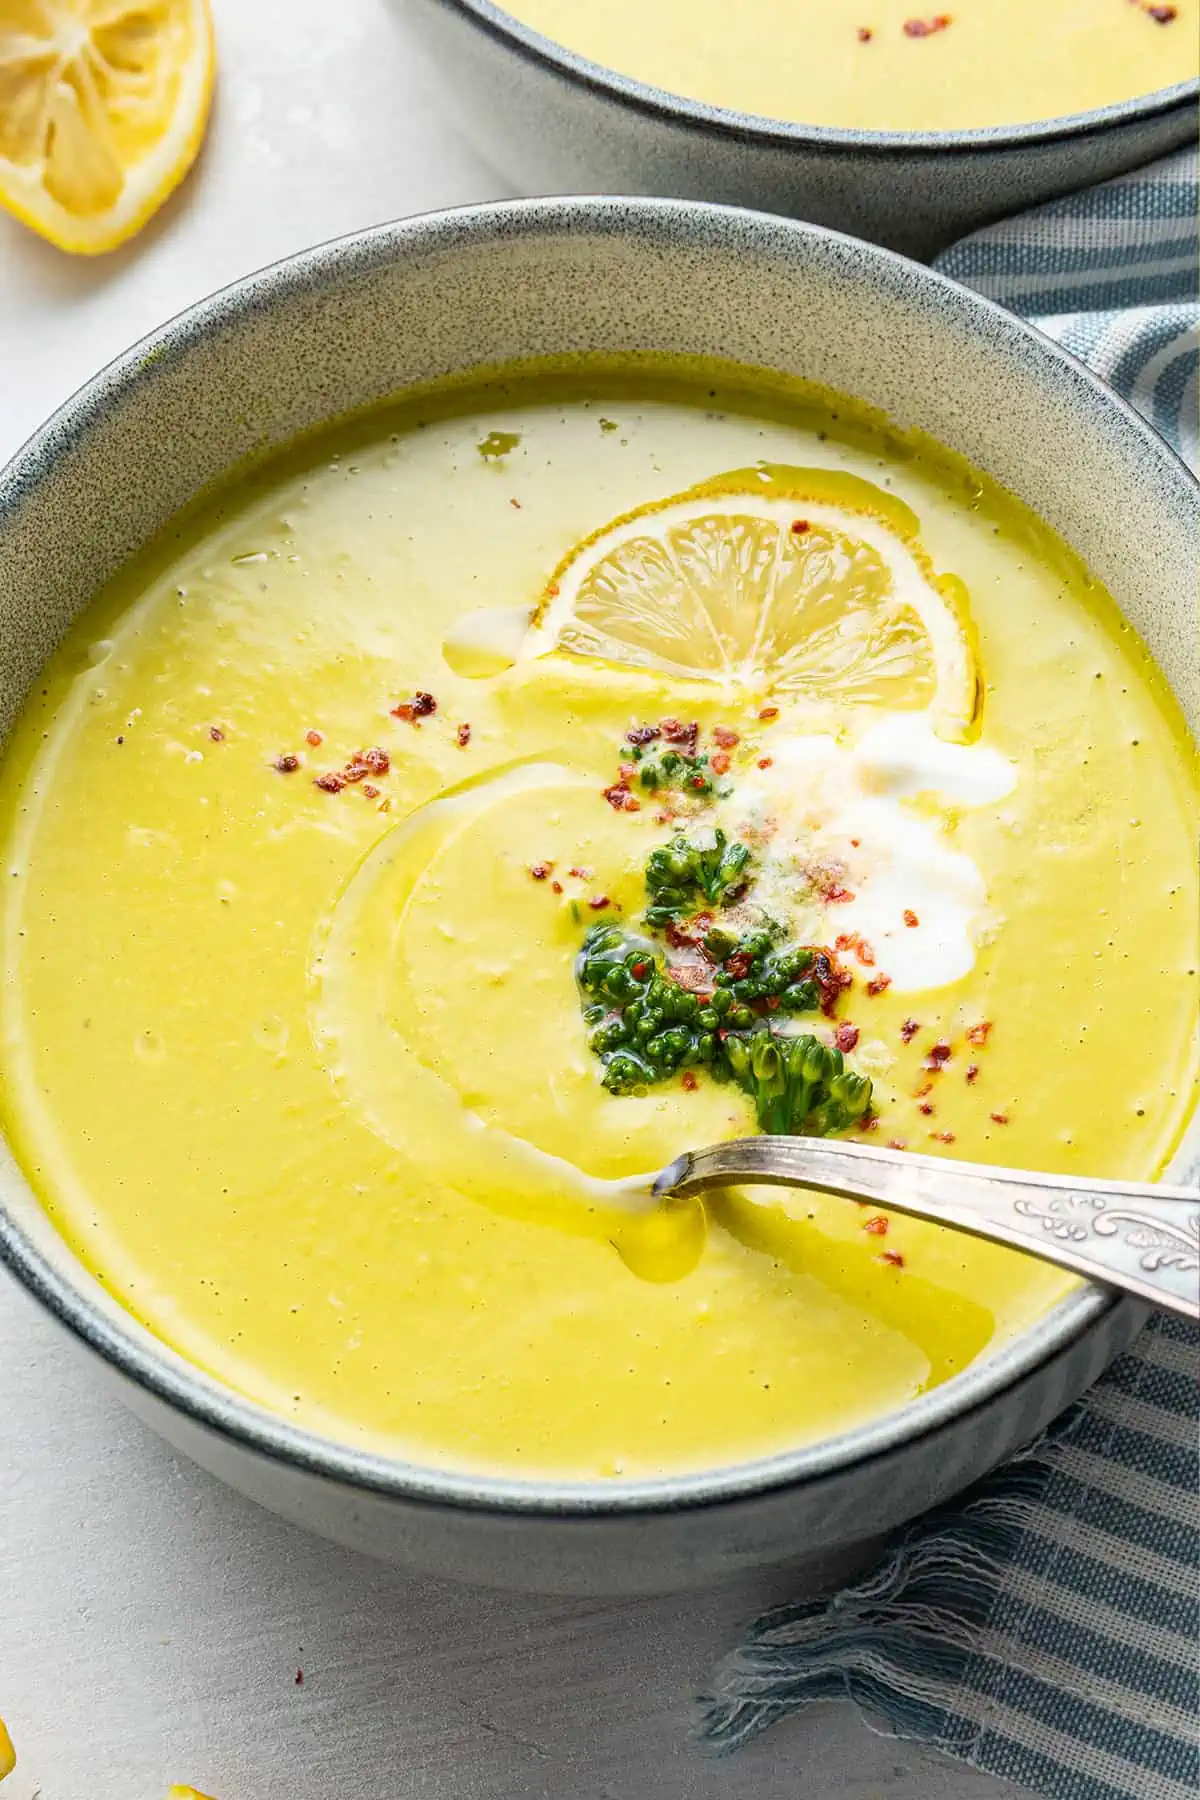 A bowl of broccoli soup garnished with broccoli, chili flakes, vegan creme fraiche, and a lemon slice, with a spoon in it